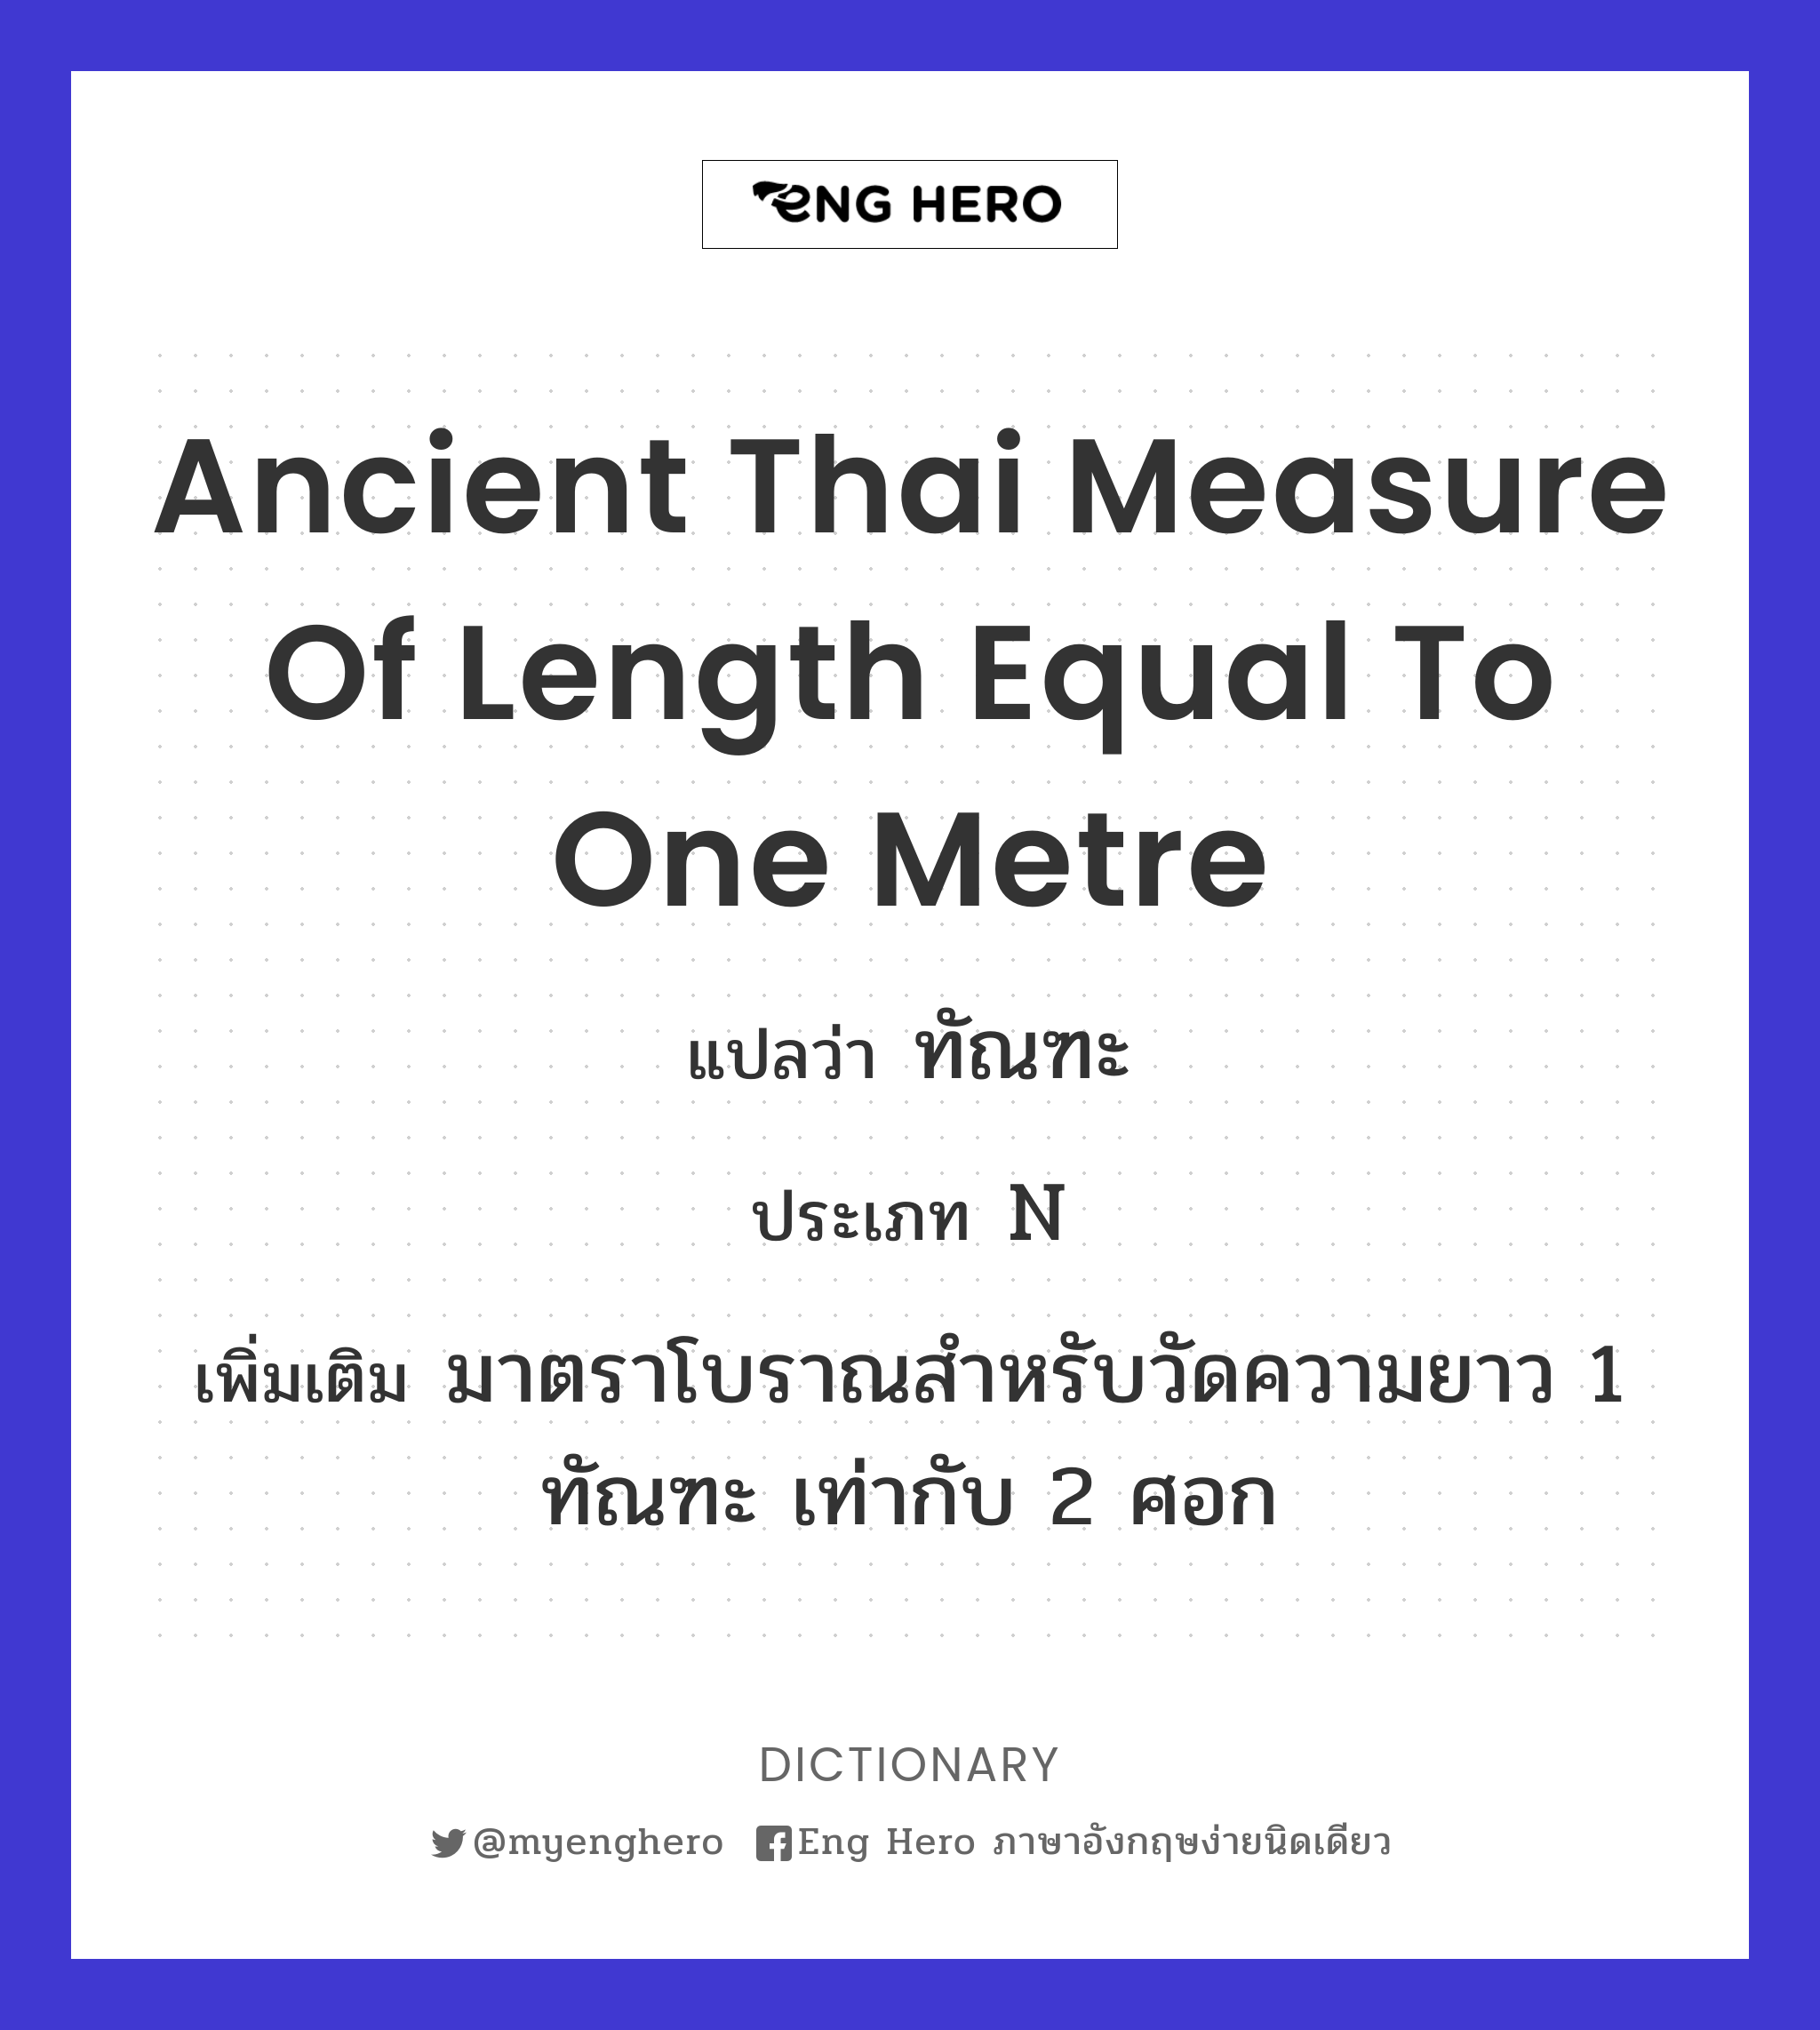 ancient Thai measure of length equal to one metre